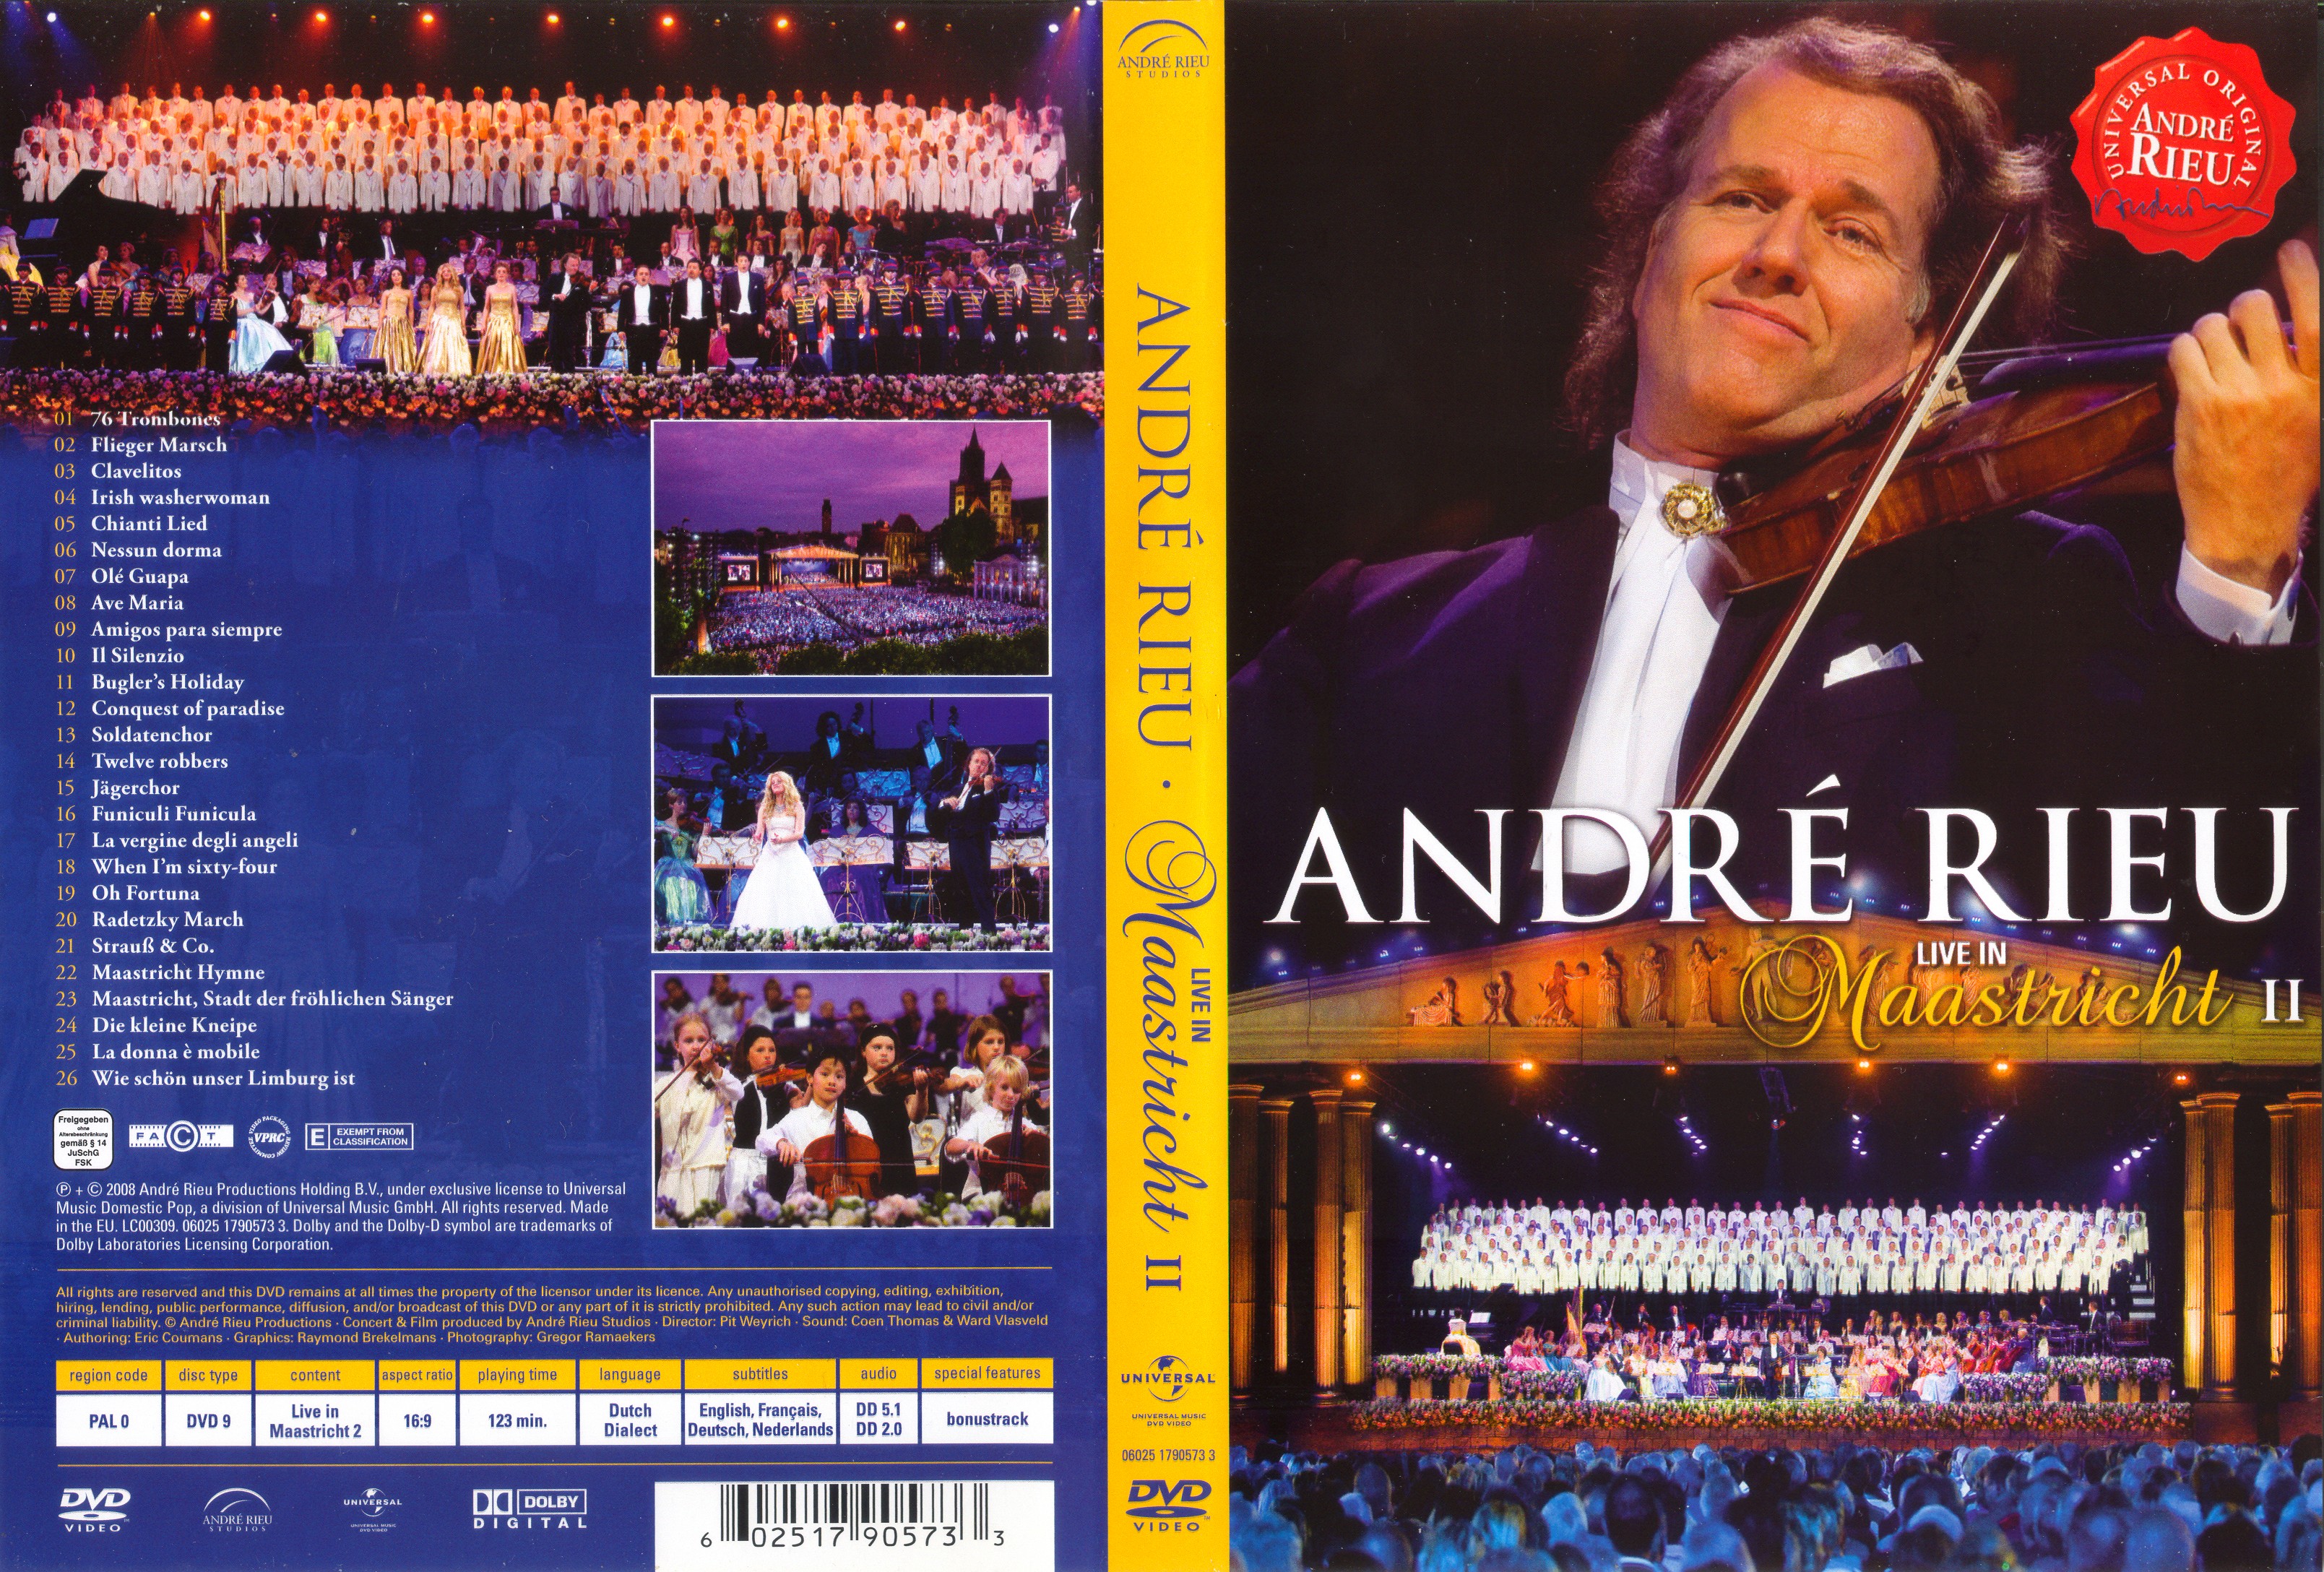 Jaquette DVD Andre rieu Live in Maastricht 2